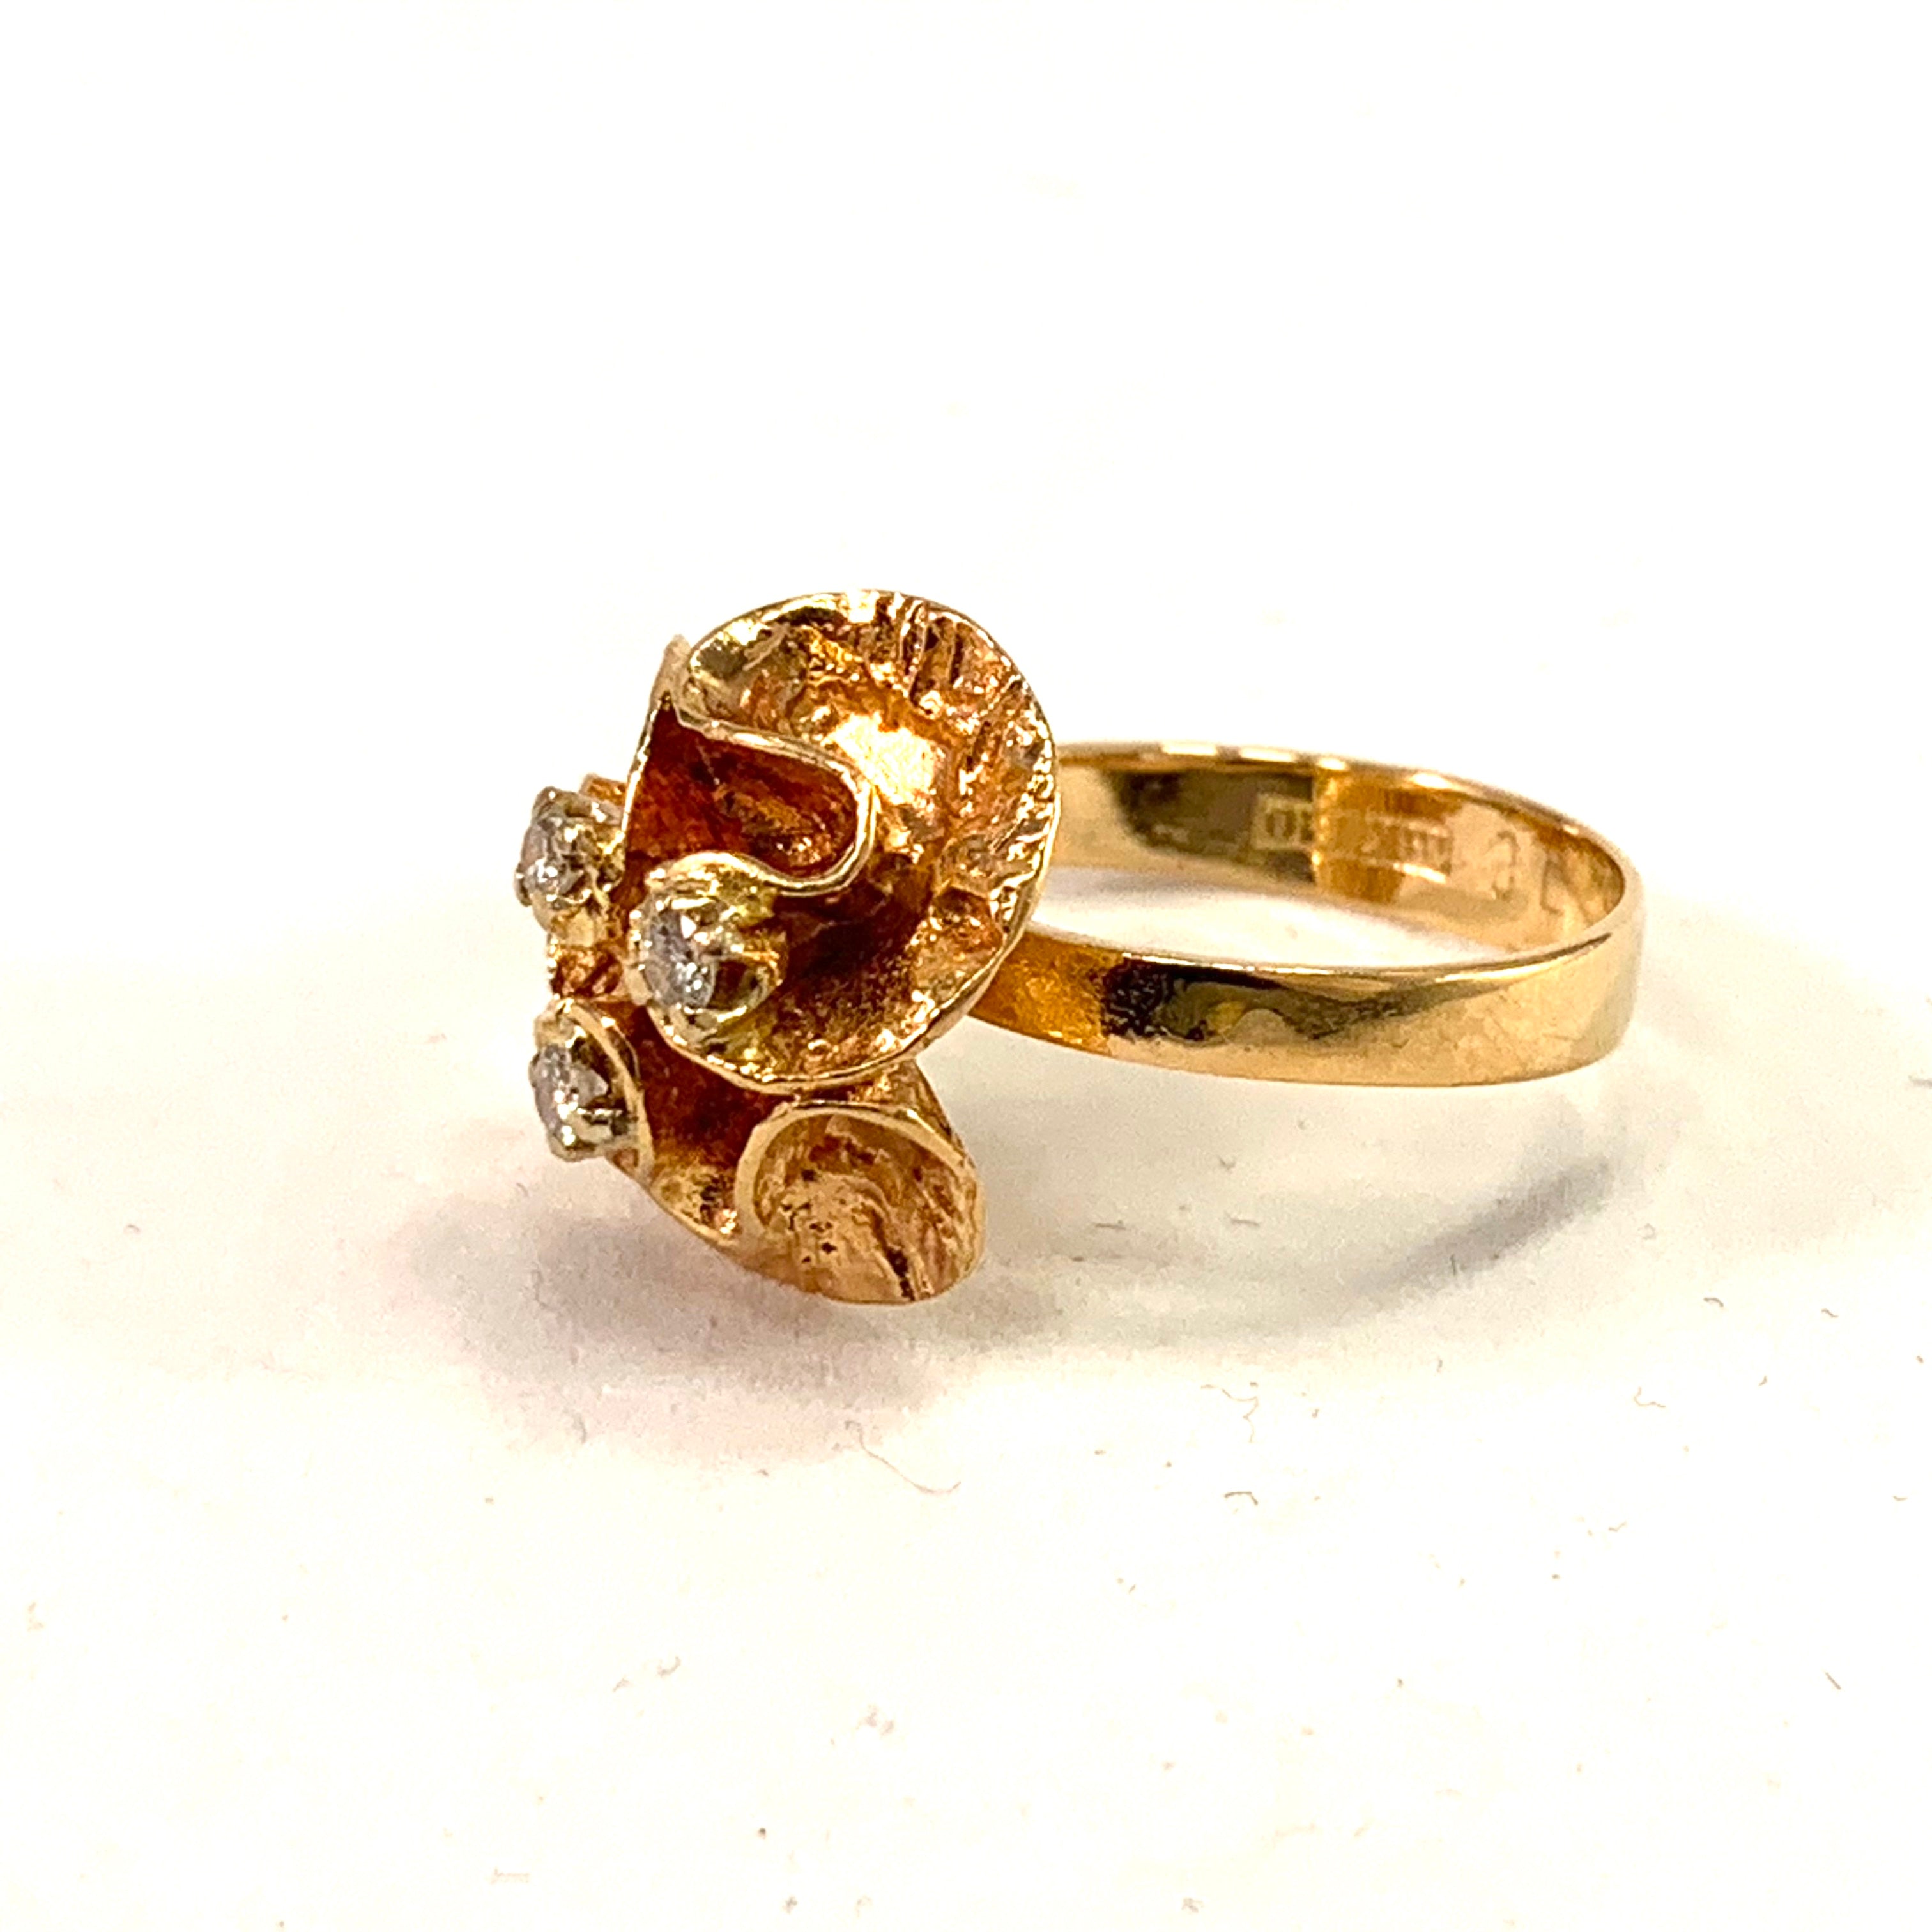 Theresia Hvorslev Sweden 1976, 18k Gold Diamond Water Lily Ring. Signed